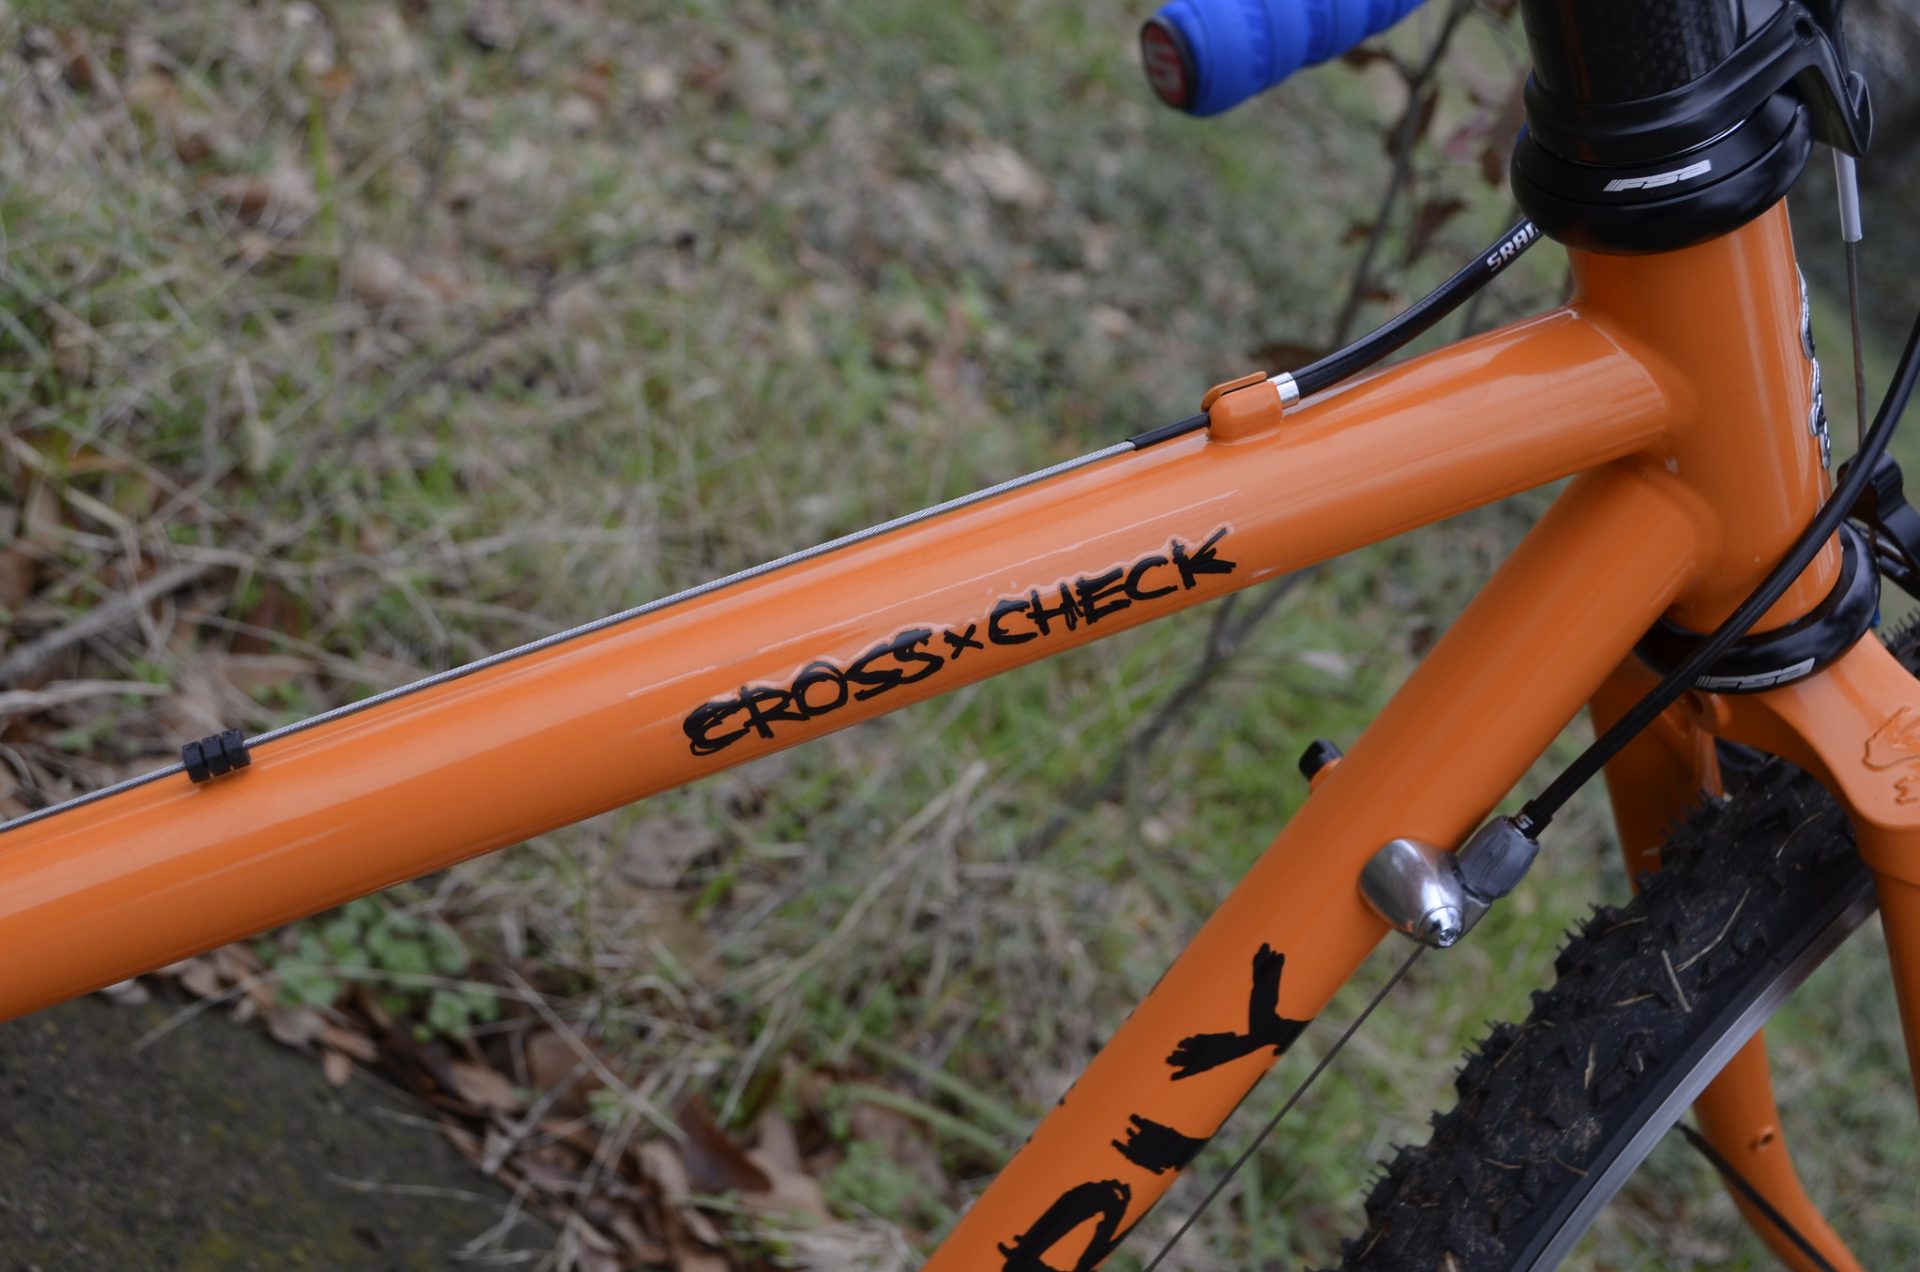 Farewell to the Surly Cross-Check, one of the first 'gravel' bikes that is  now officially discontinued